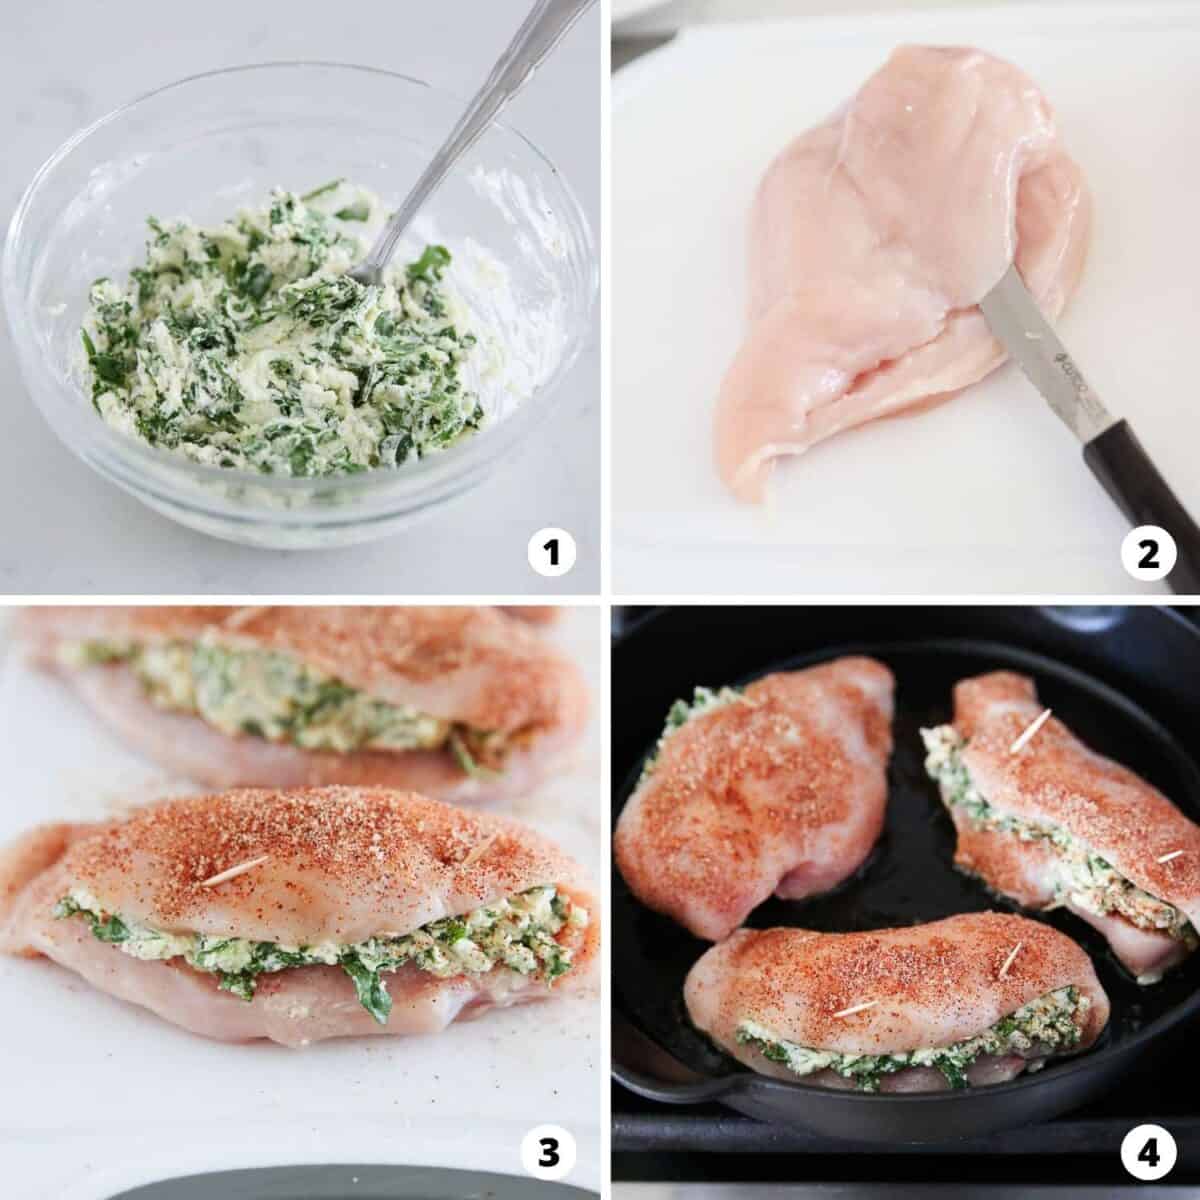 The process of showing how to make spinach stuffed chicken in a 4 step collage.